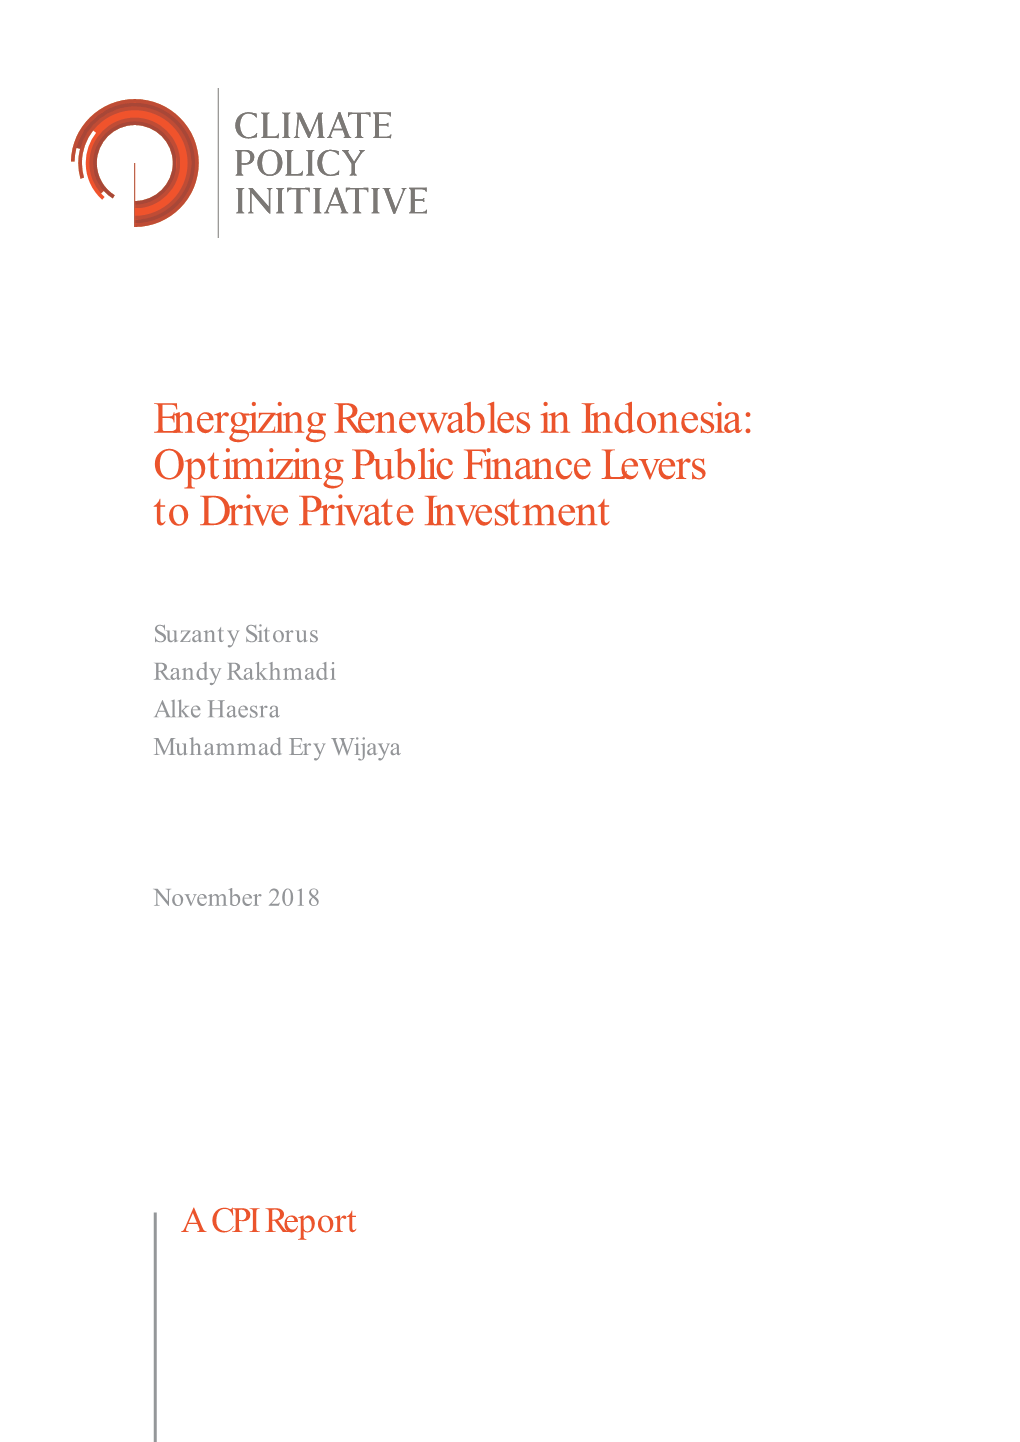 Energizing Renewables in Indonesia: Optimizing Public Finance Levers to Drive Private Investment